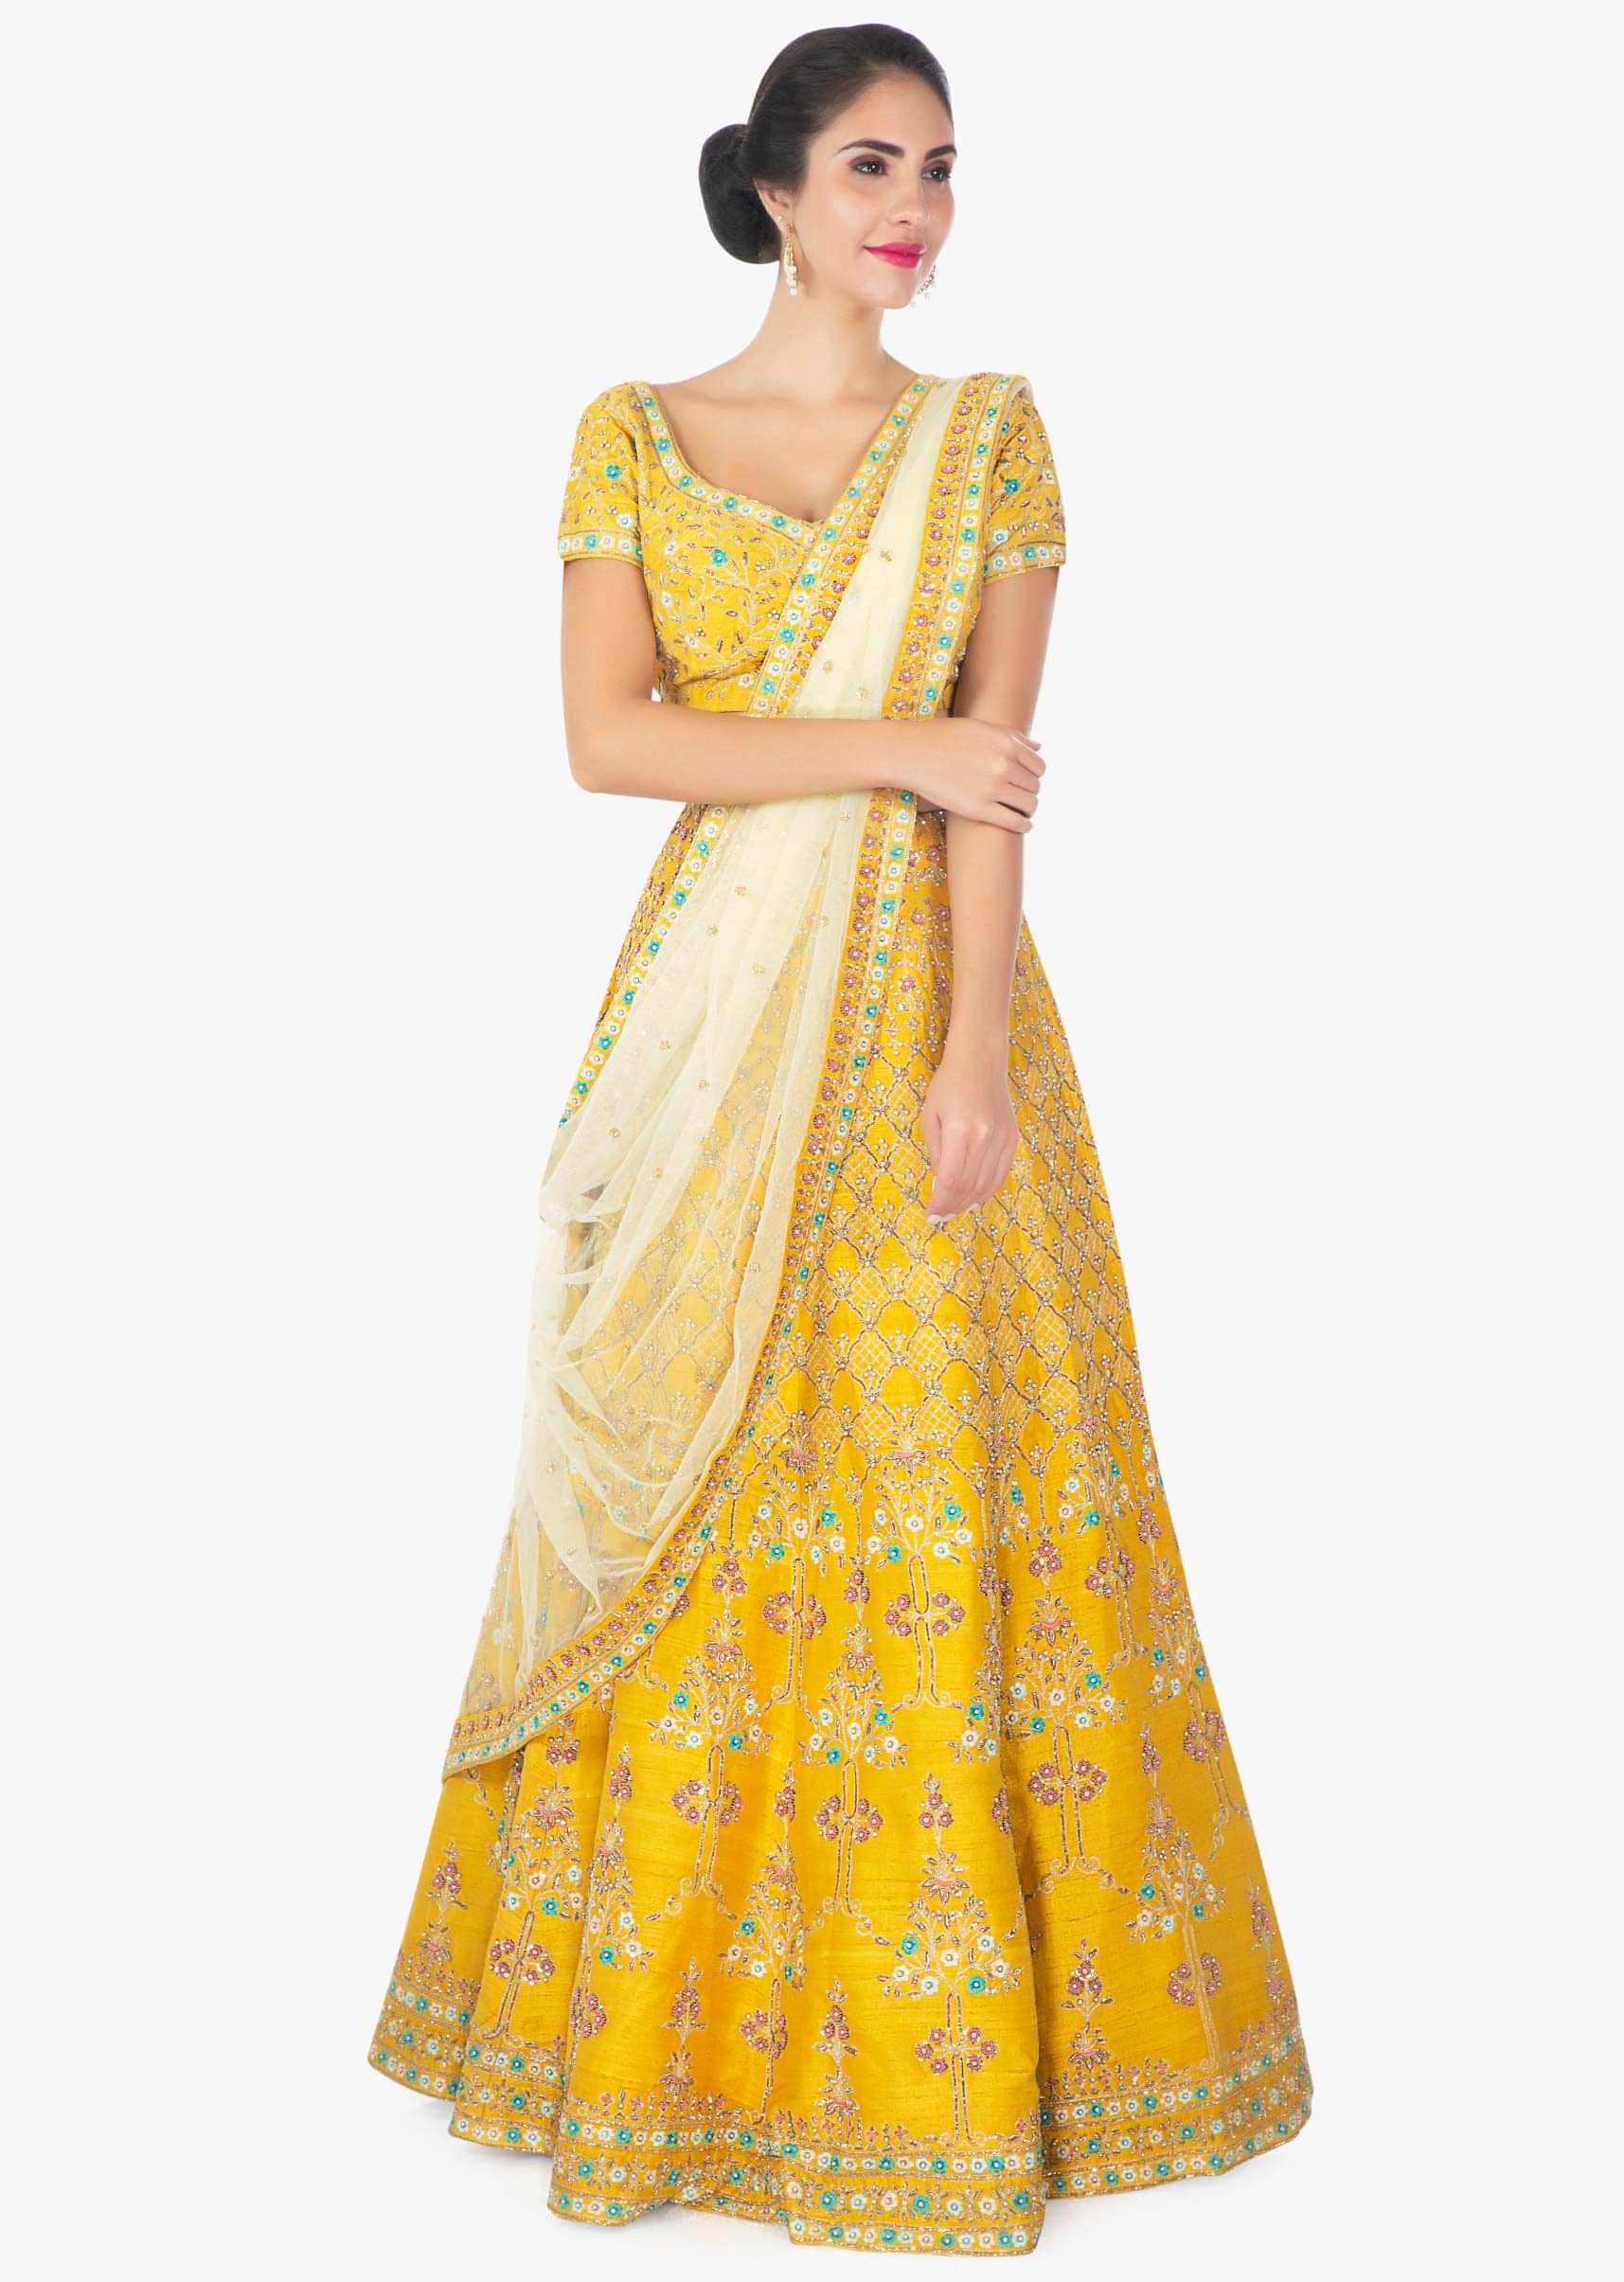 Mustard yellow raw silk lehenga blouse paired with a contrasting net dupatta